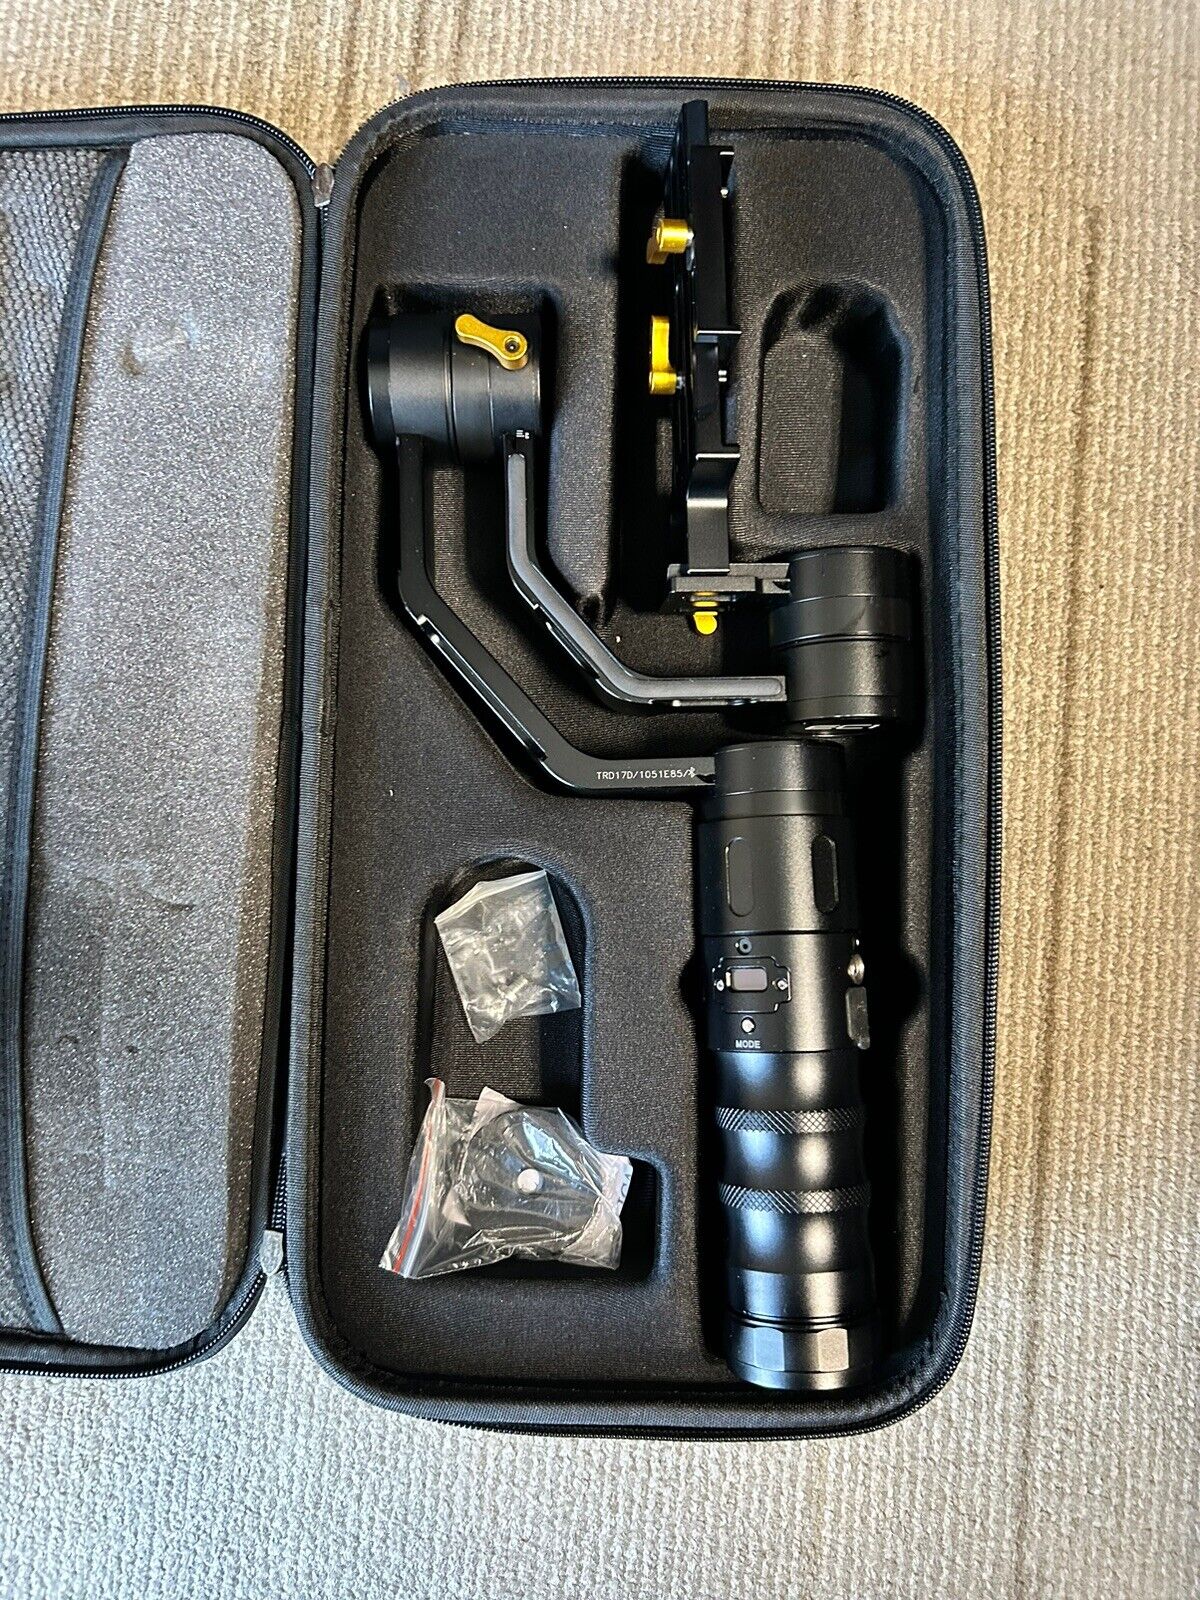 ikan EC1 Beholder 3-Axis Handheld Gimbal Stabilizer For Photography, Used Once.